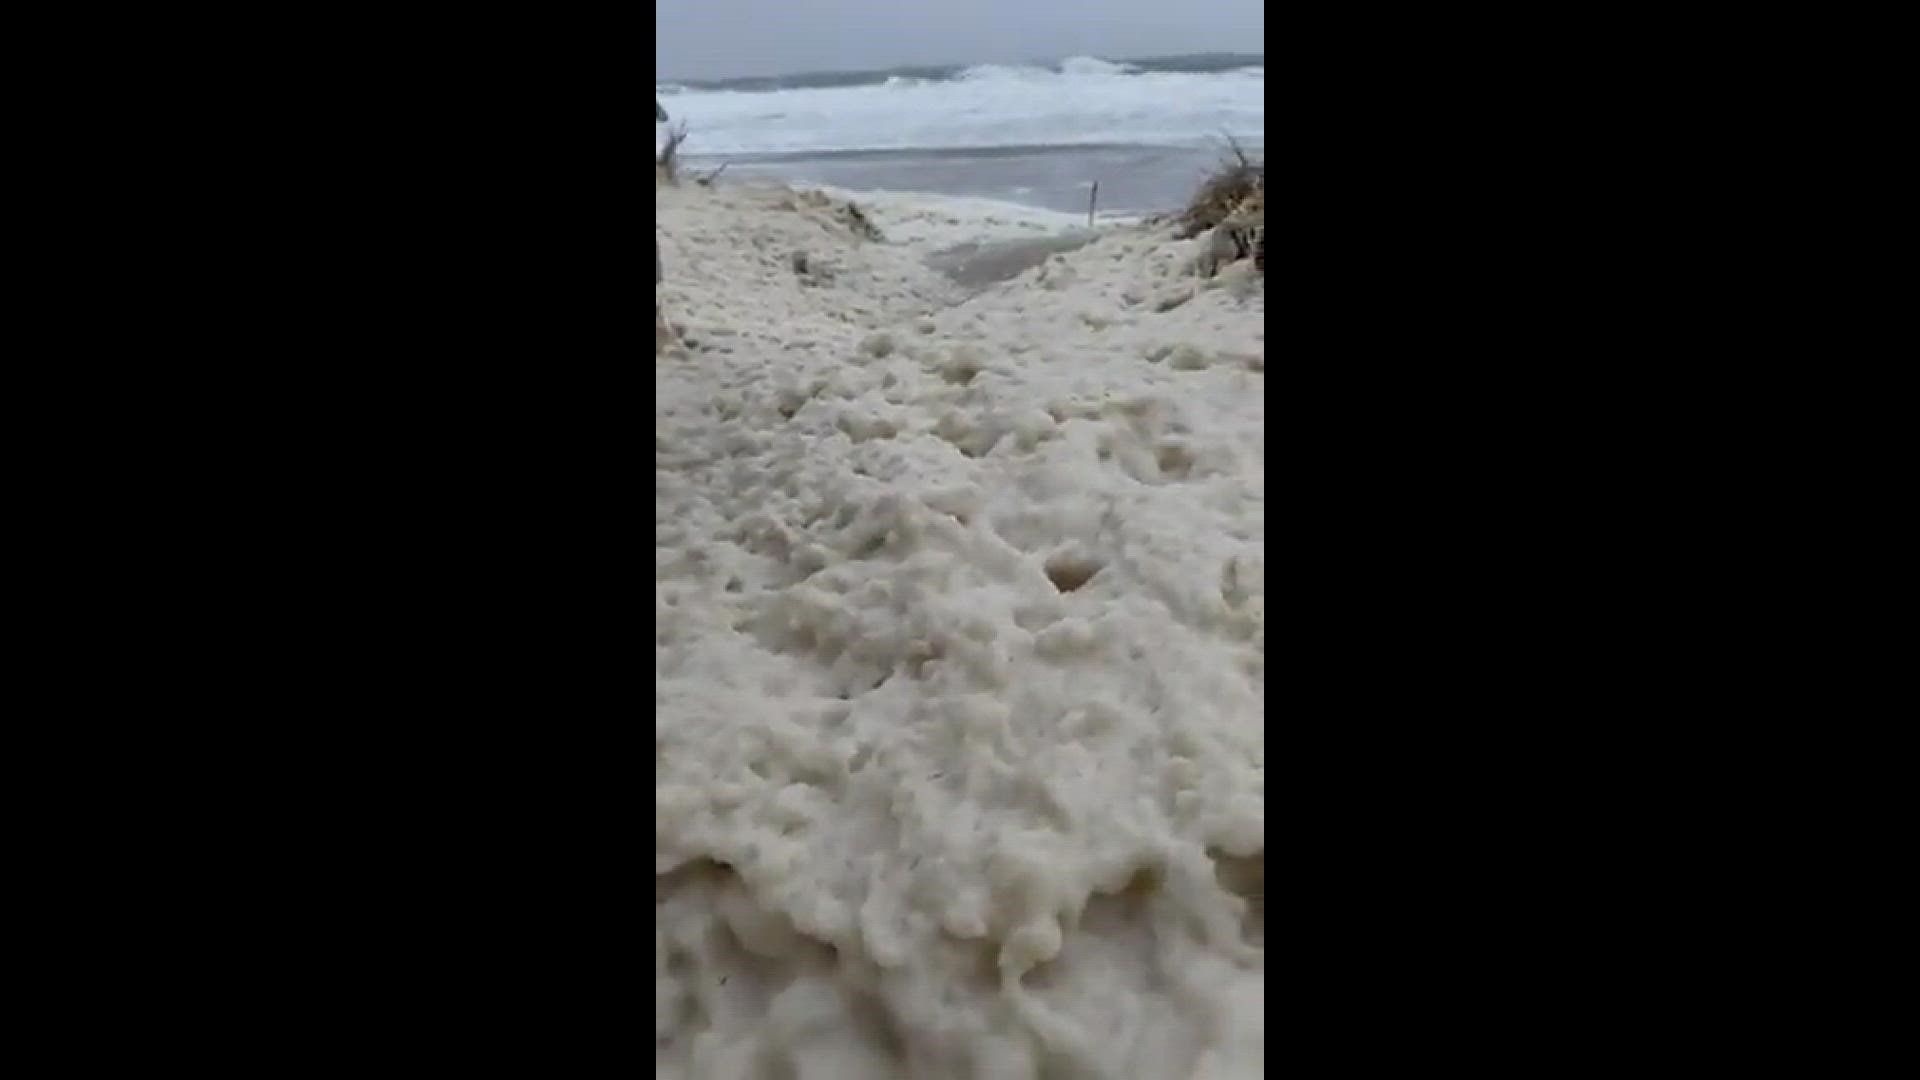 Bay Nature Magazine: How Much Sea Foam Is Normal?